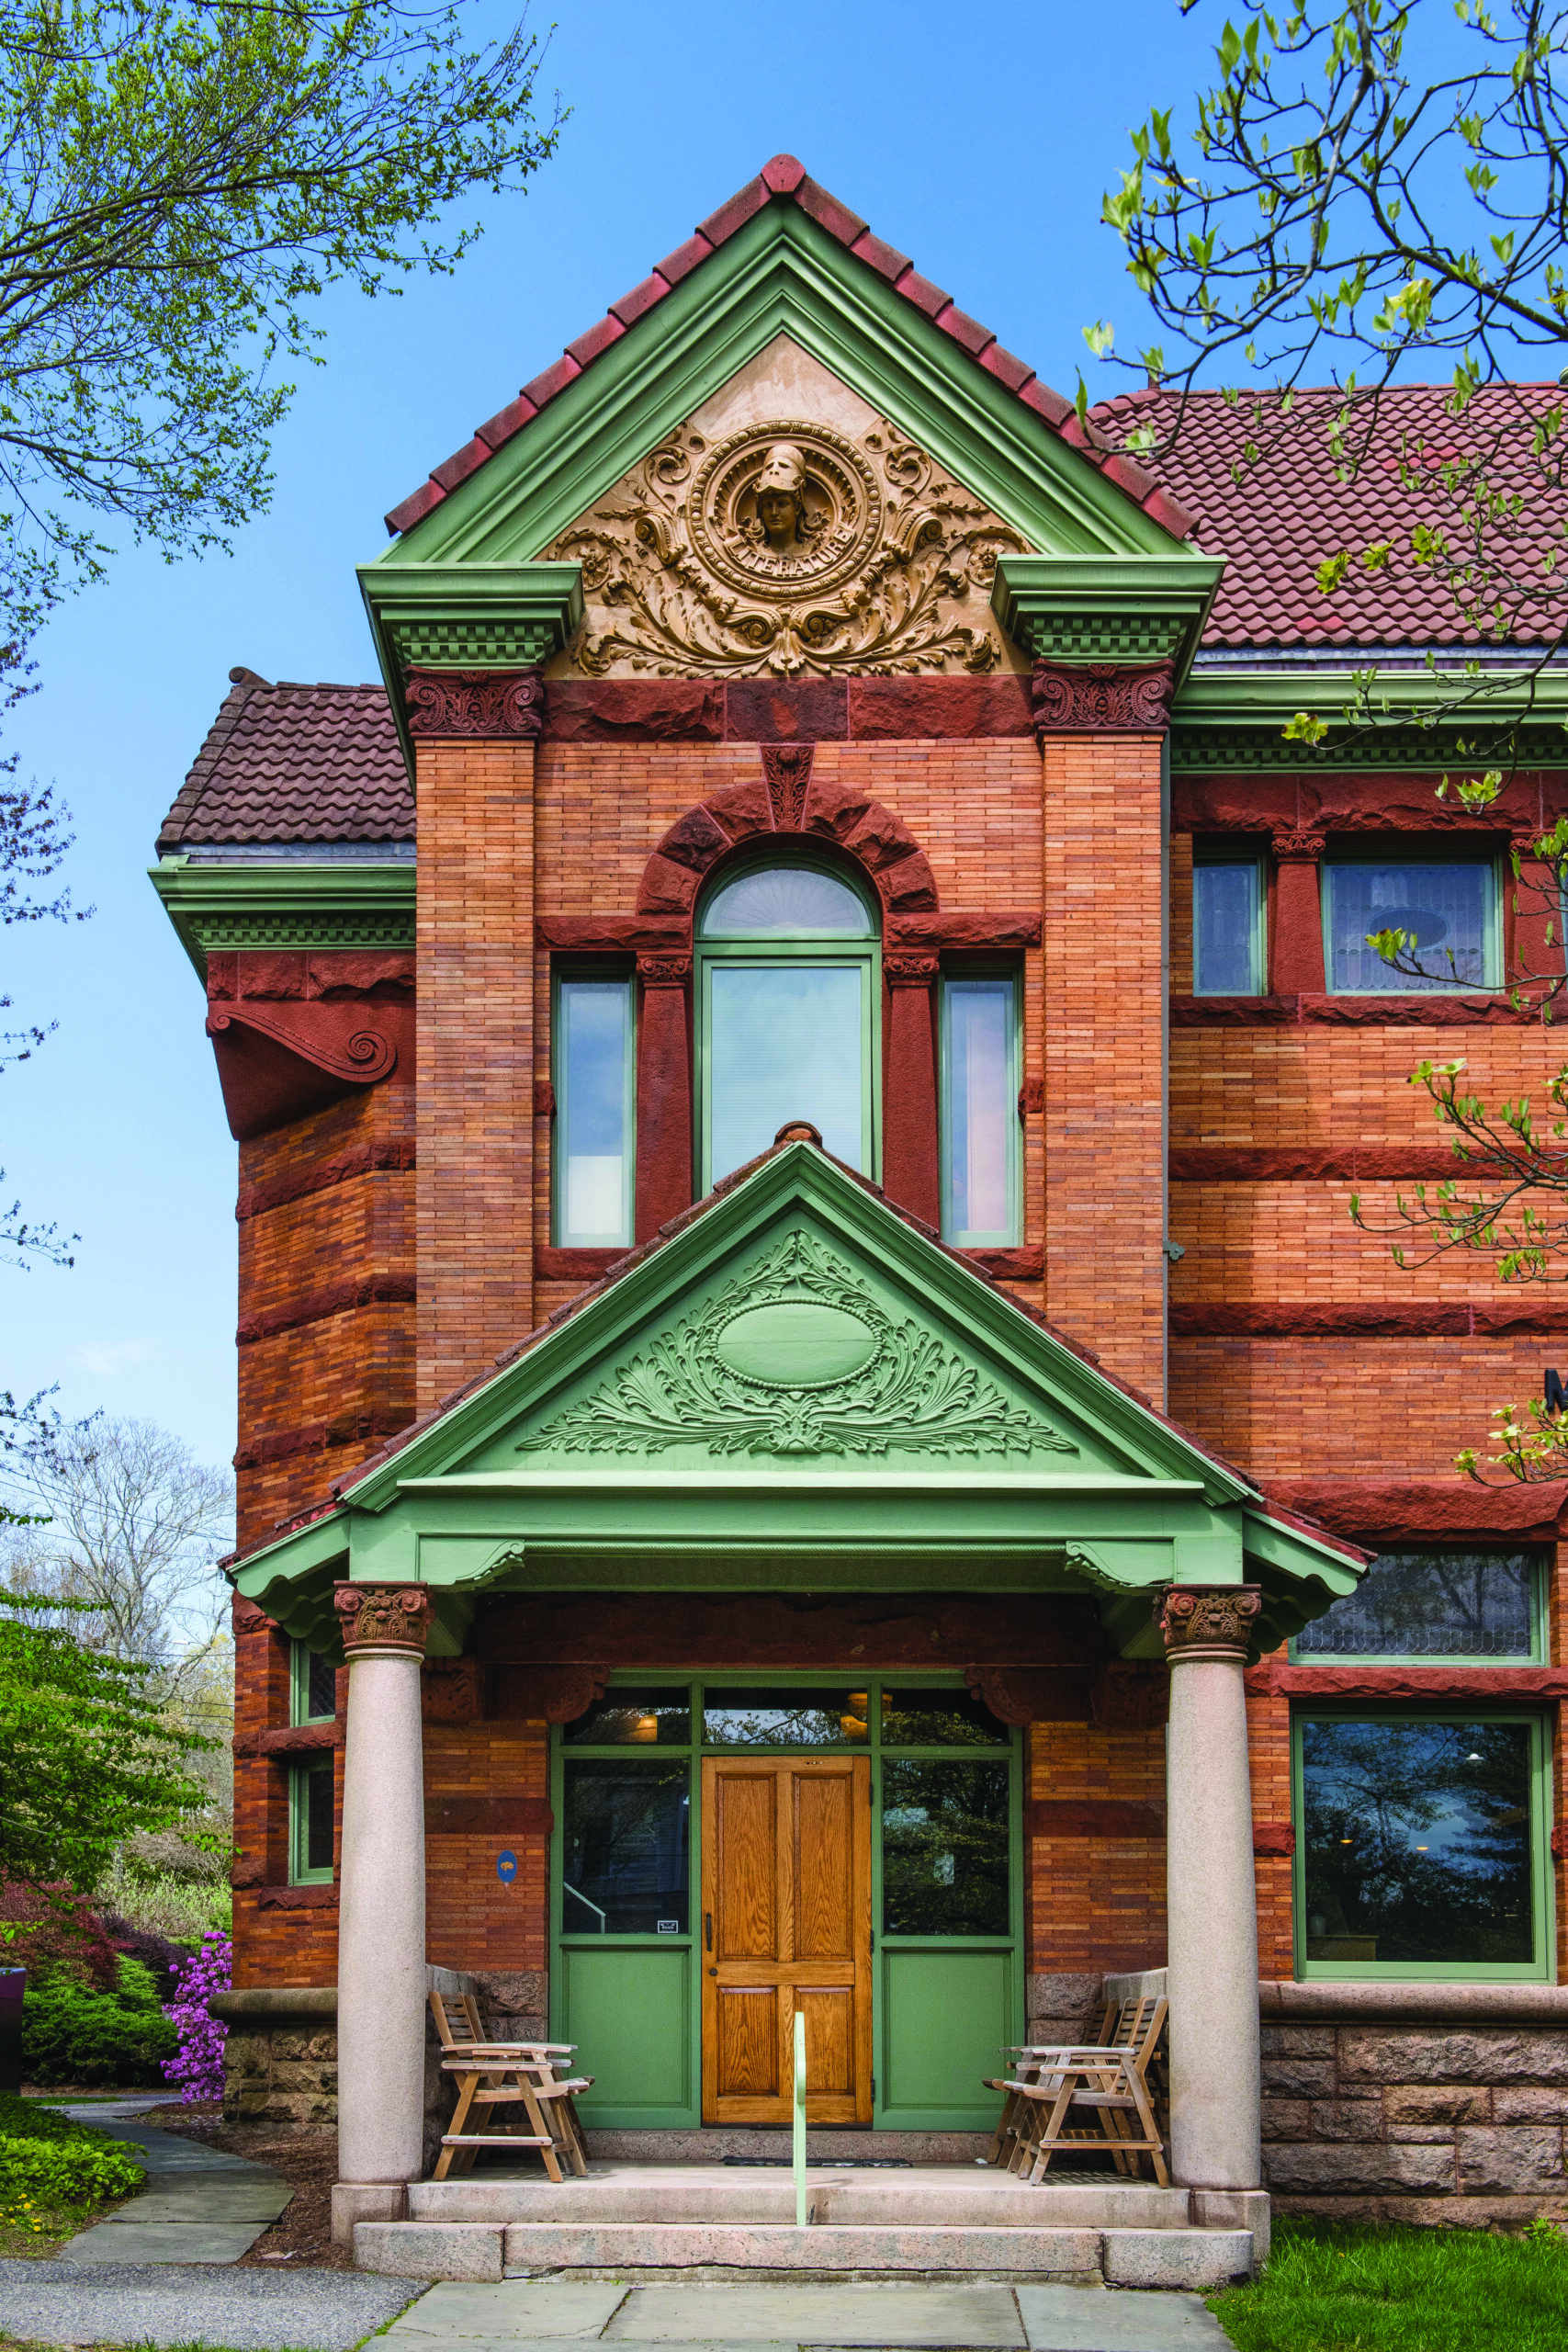 old ornate building entry way. red brick with sage green trim and detailing. there is a wooden door in the front with chairs outside.